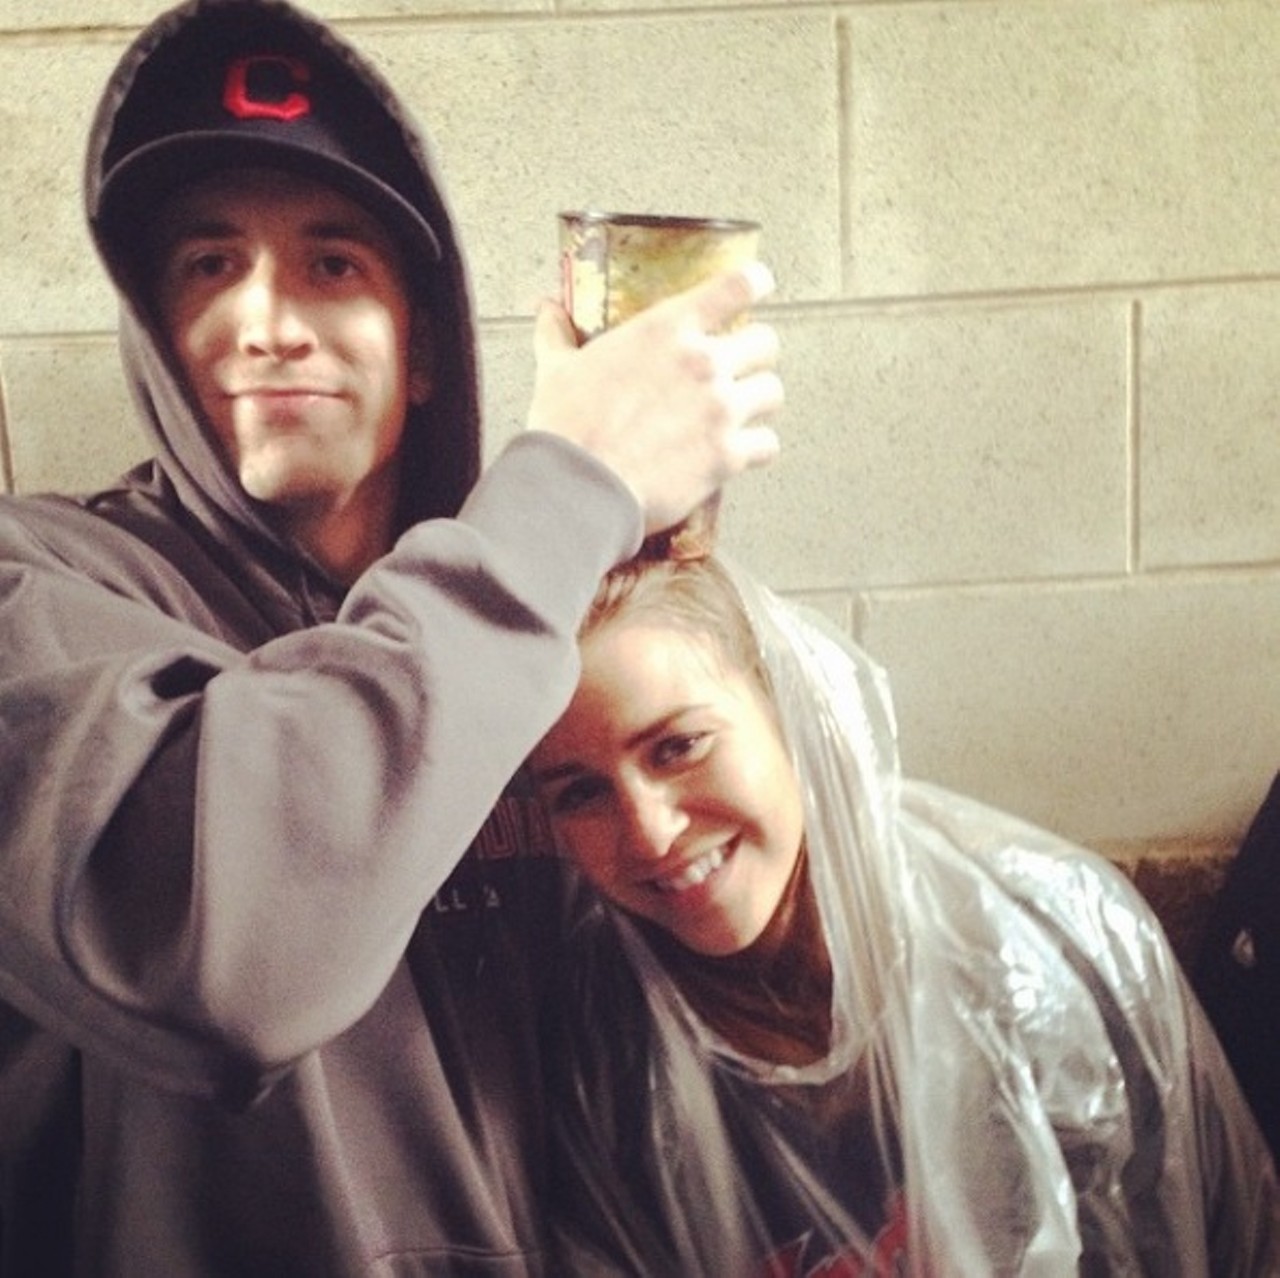 The 16 People You'll Meet at The Indians Home Opener